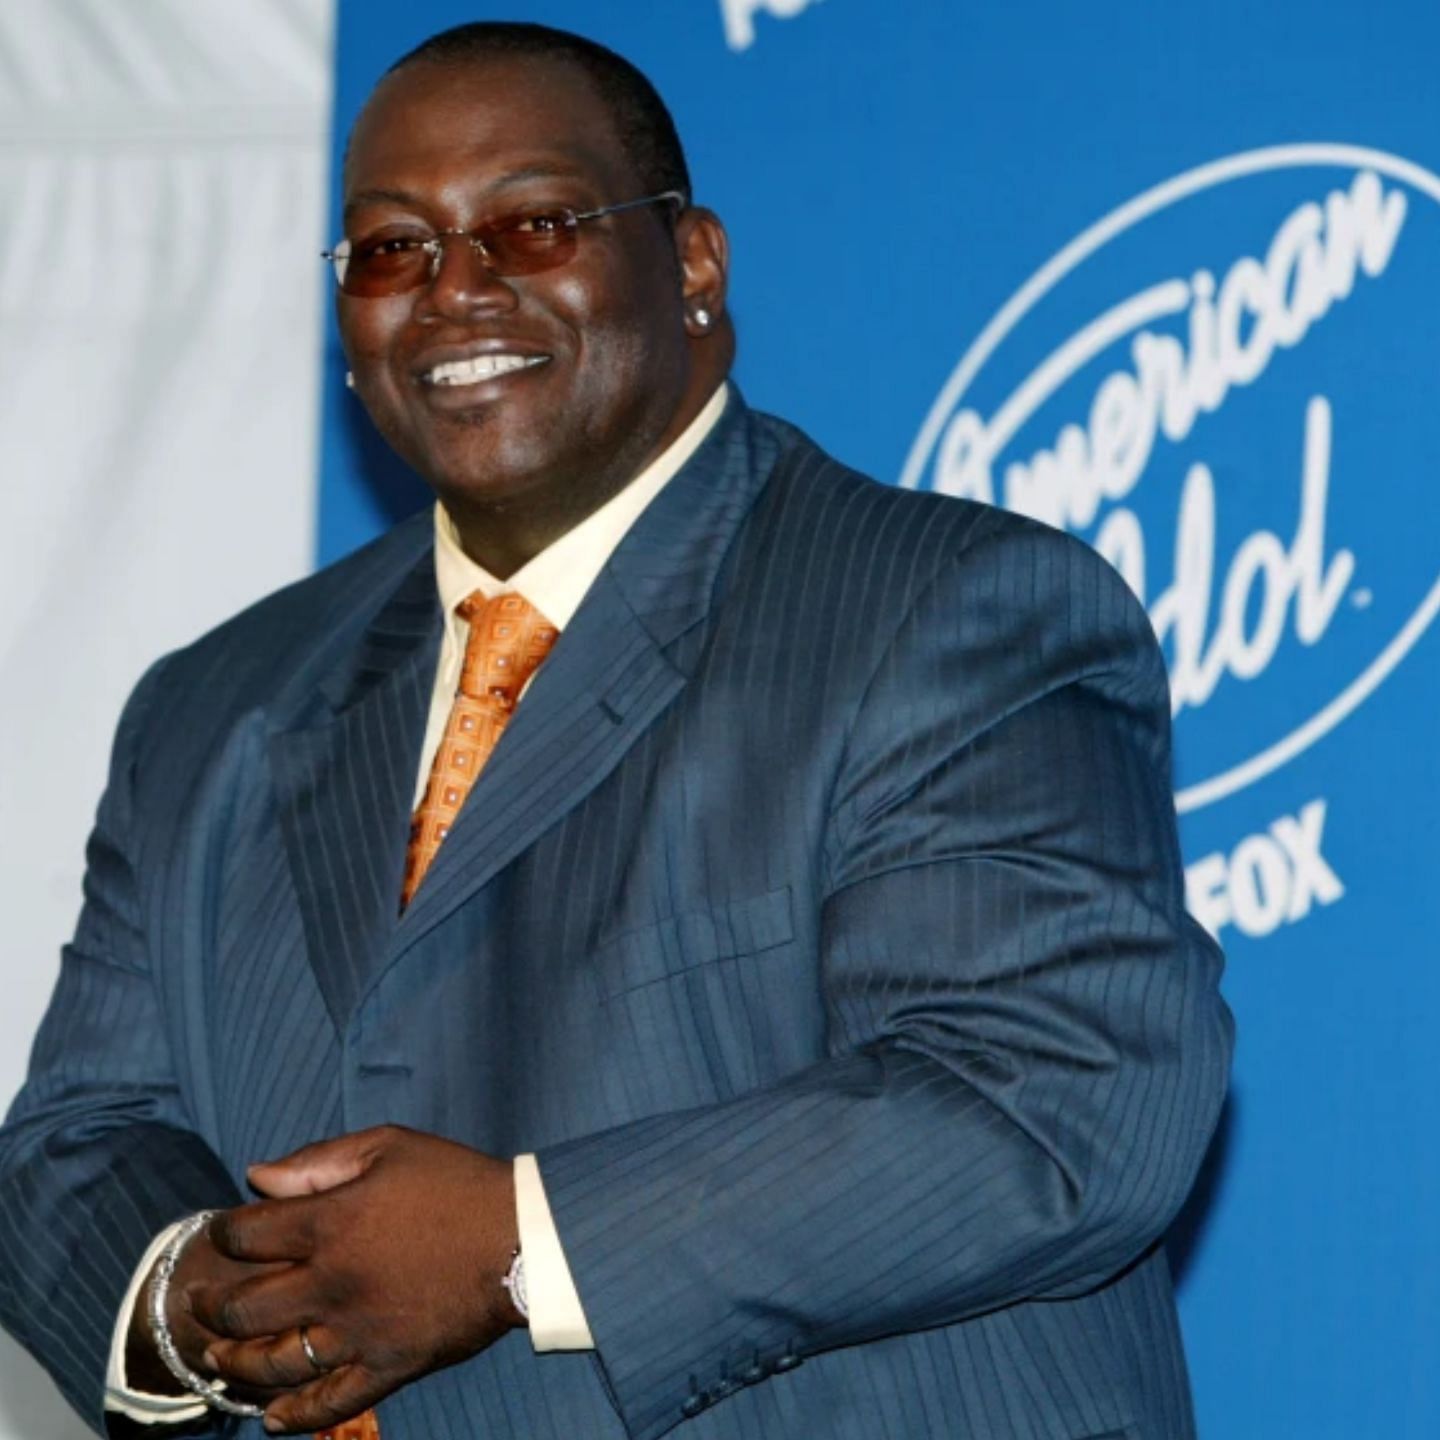 Randy Jackson (Before) (Image via Getty Images)